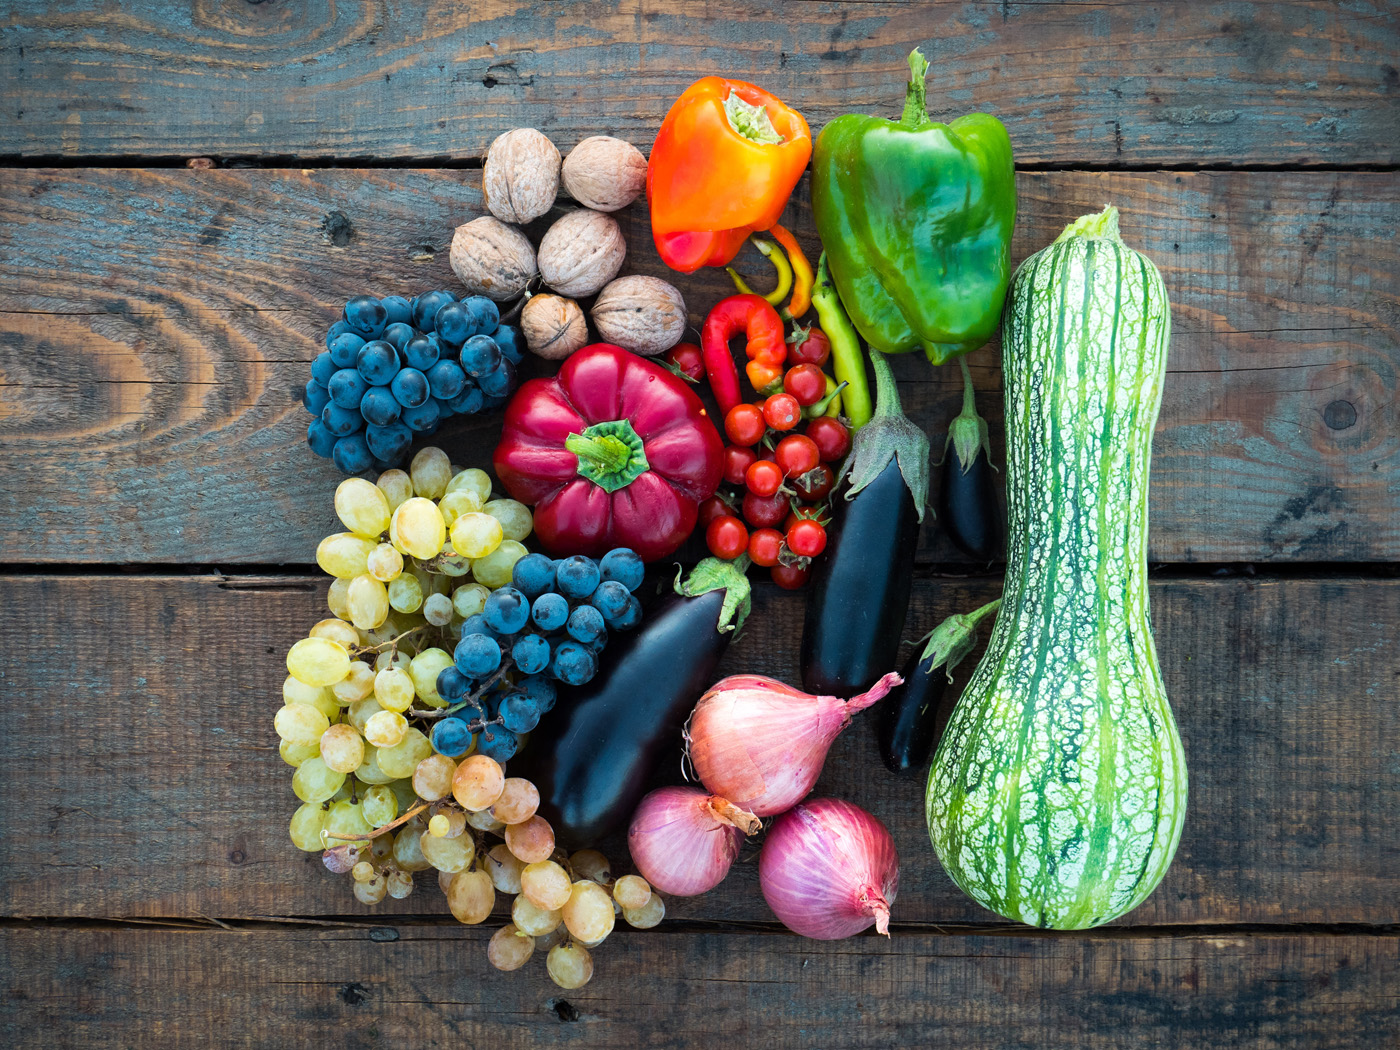 fruits and vegetables to support microbiome